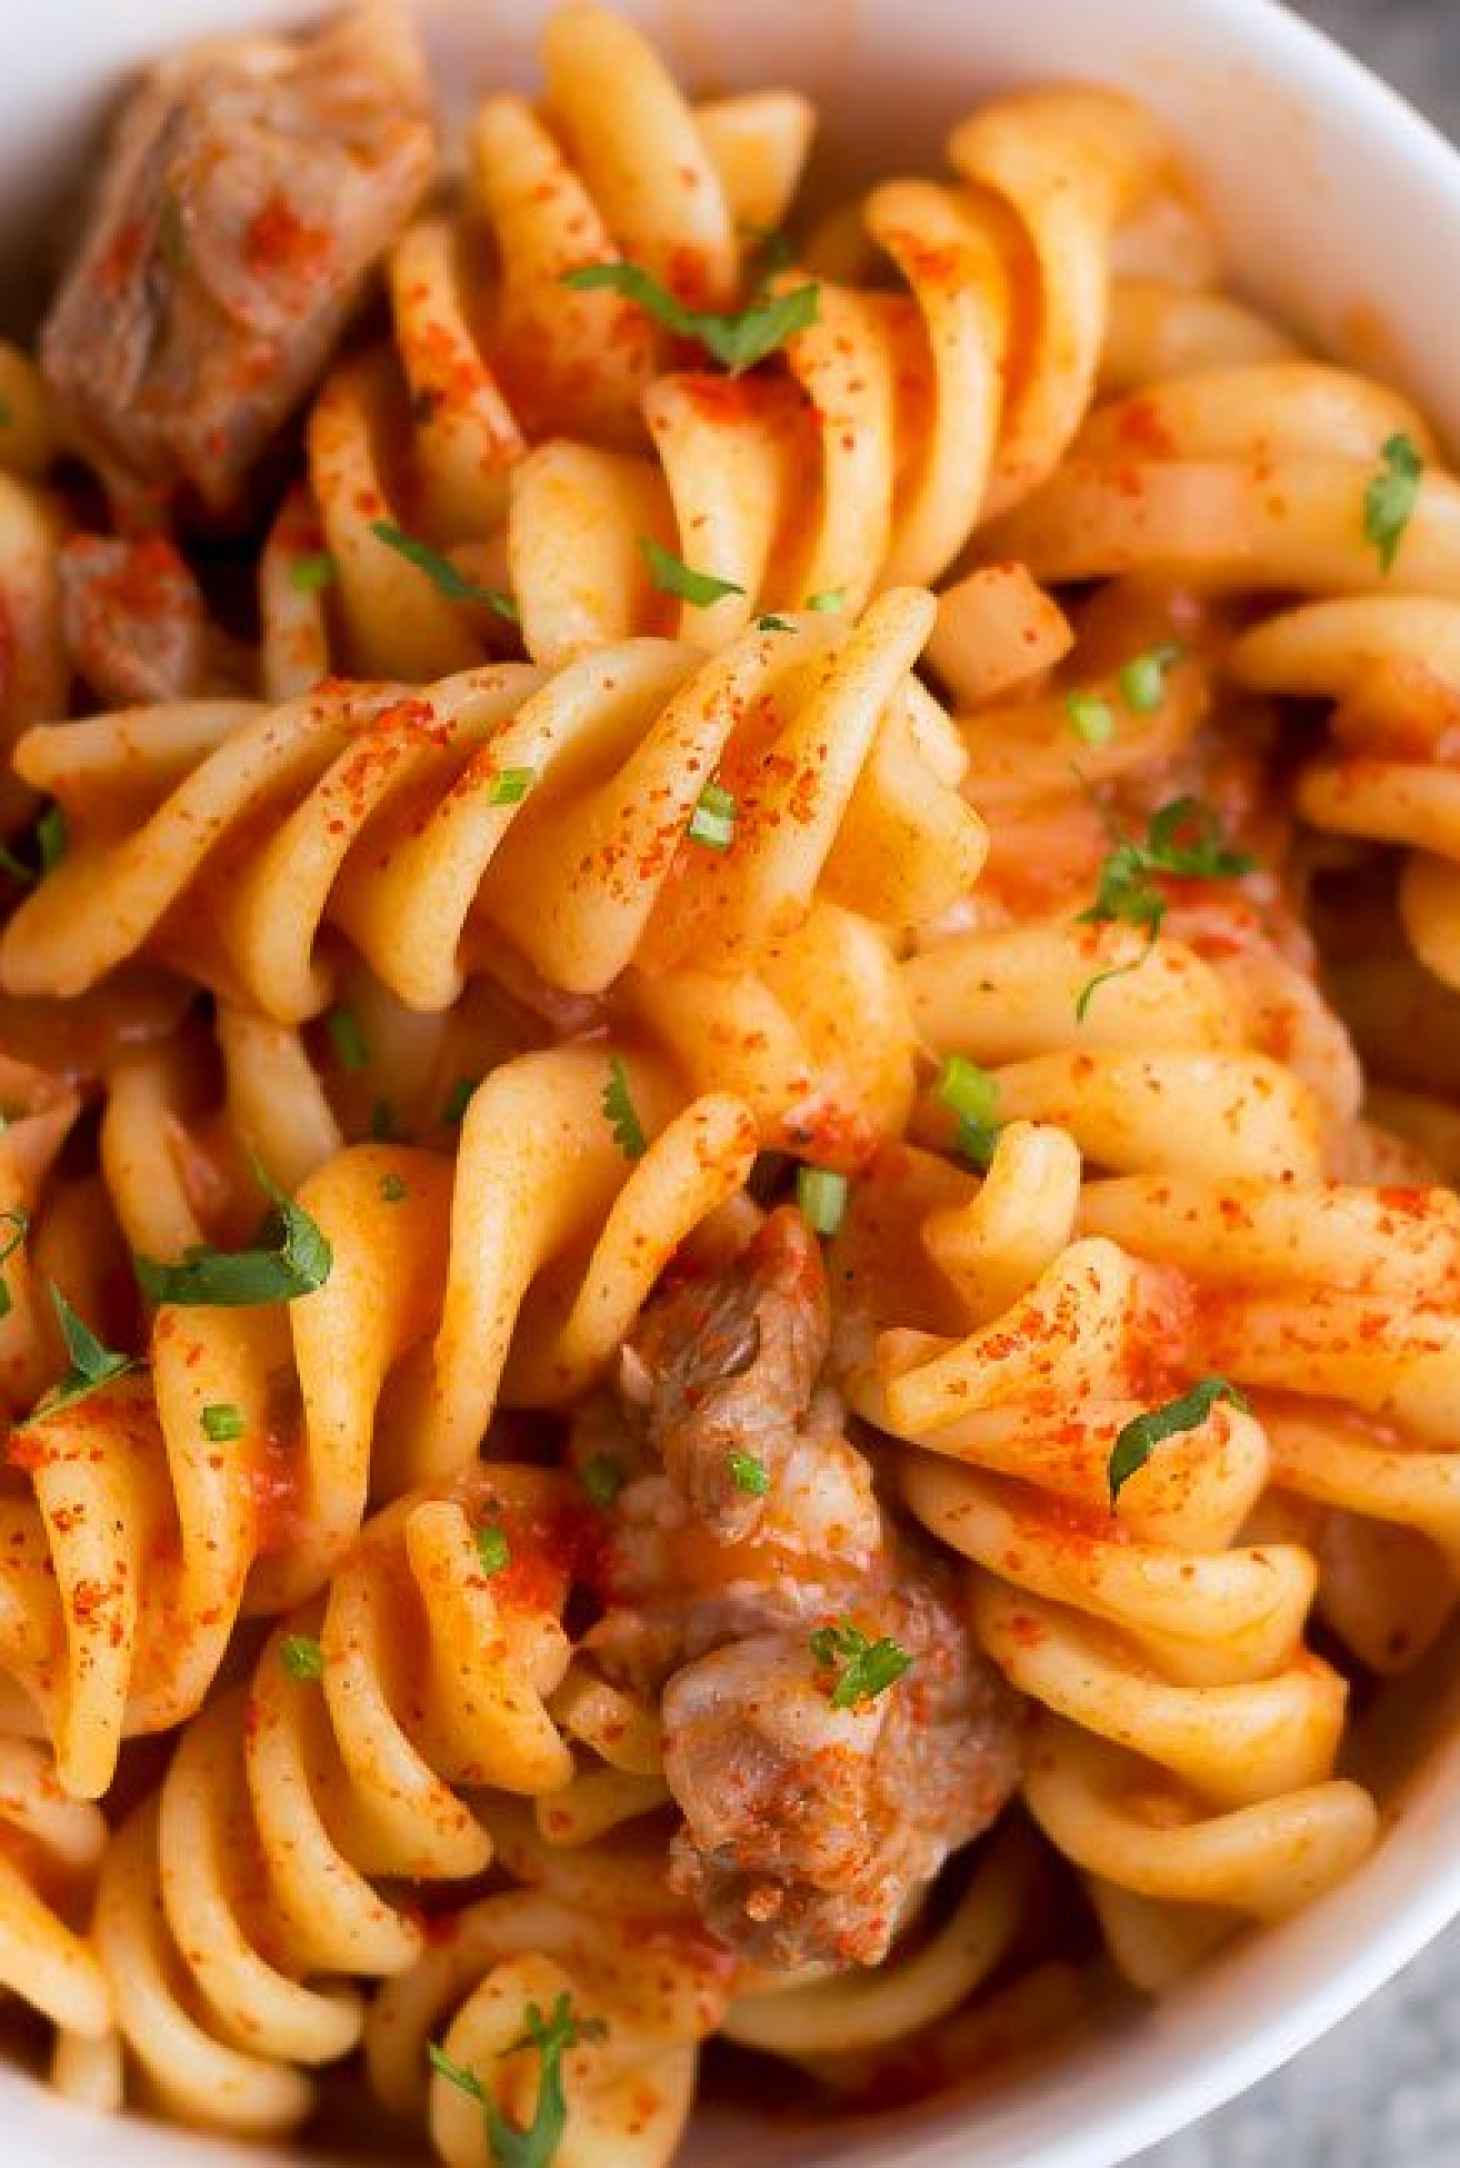 Easy Pasta Recipes: These 18 Easy & Delicious Pasta Recipes Will Save